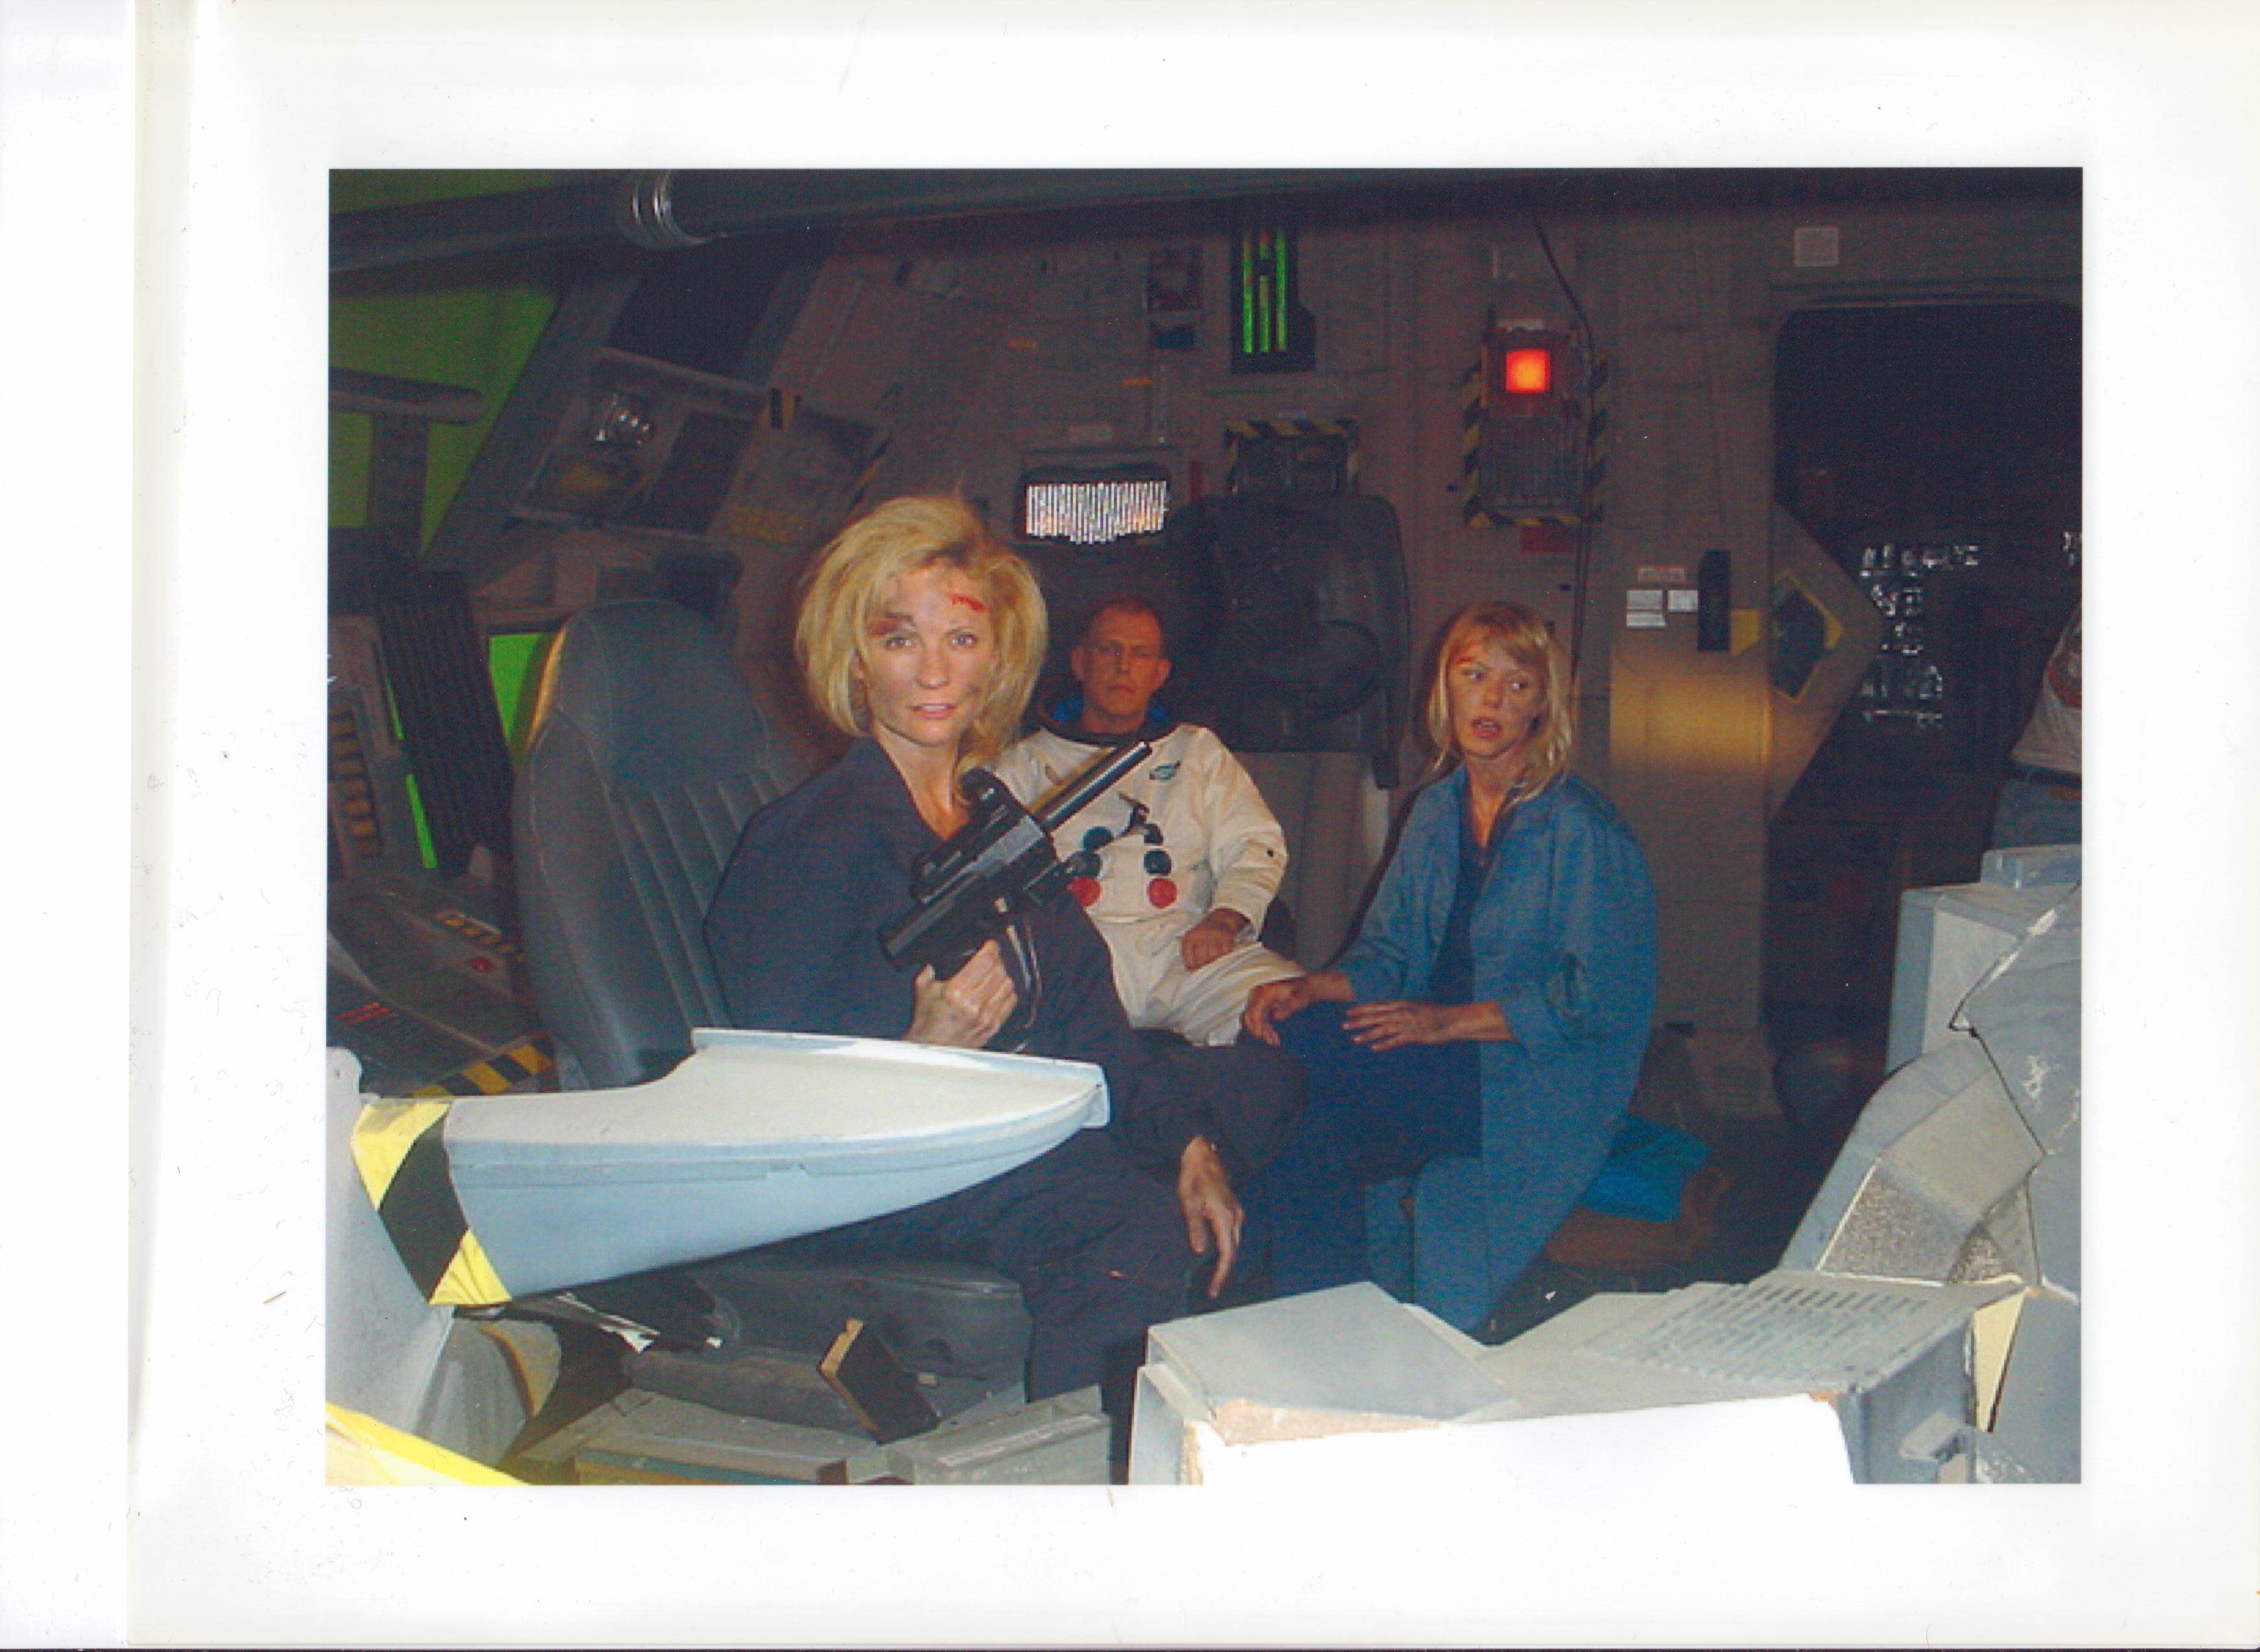 On the set of Decaying Orbit after the explosion!